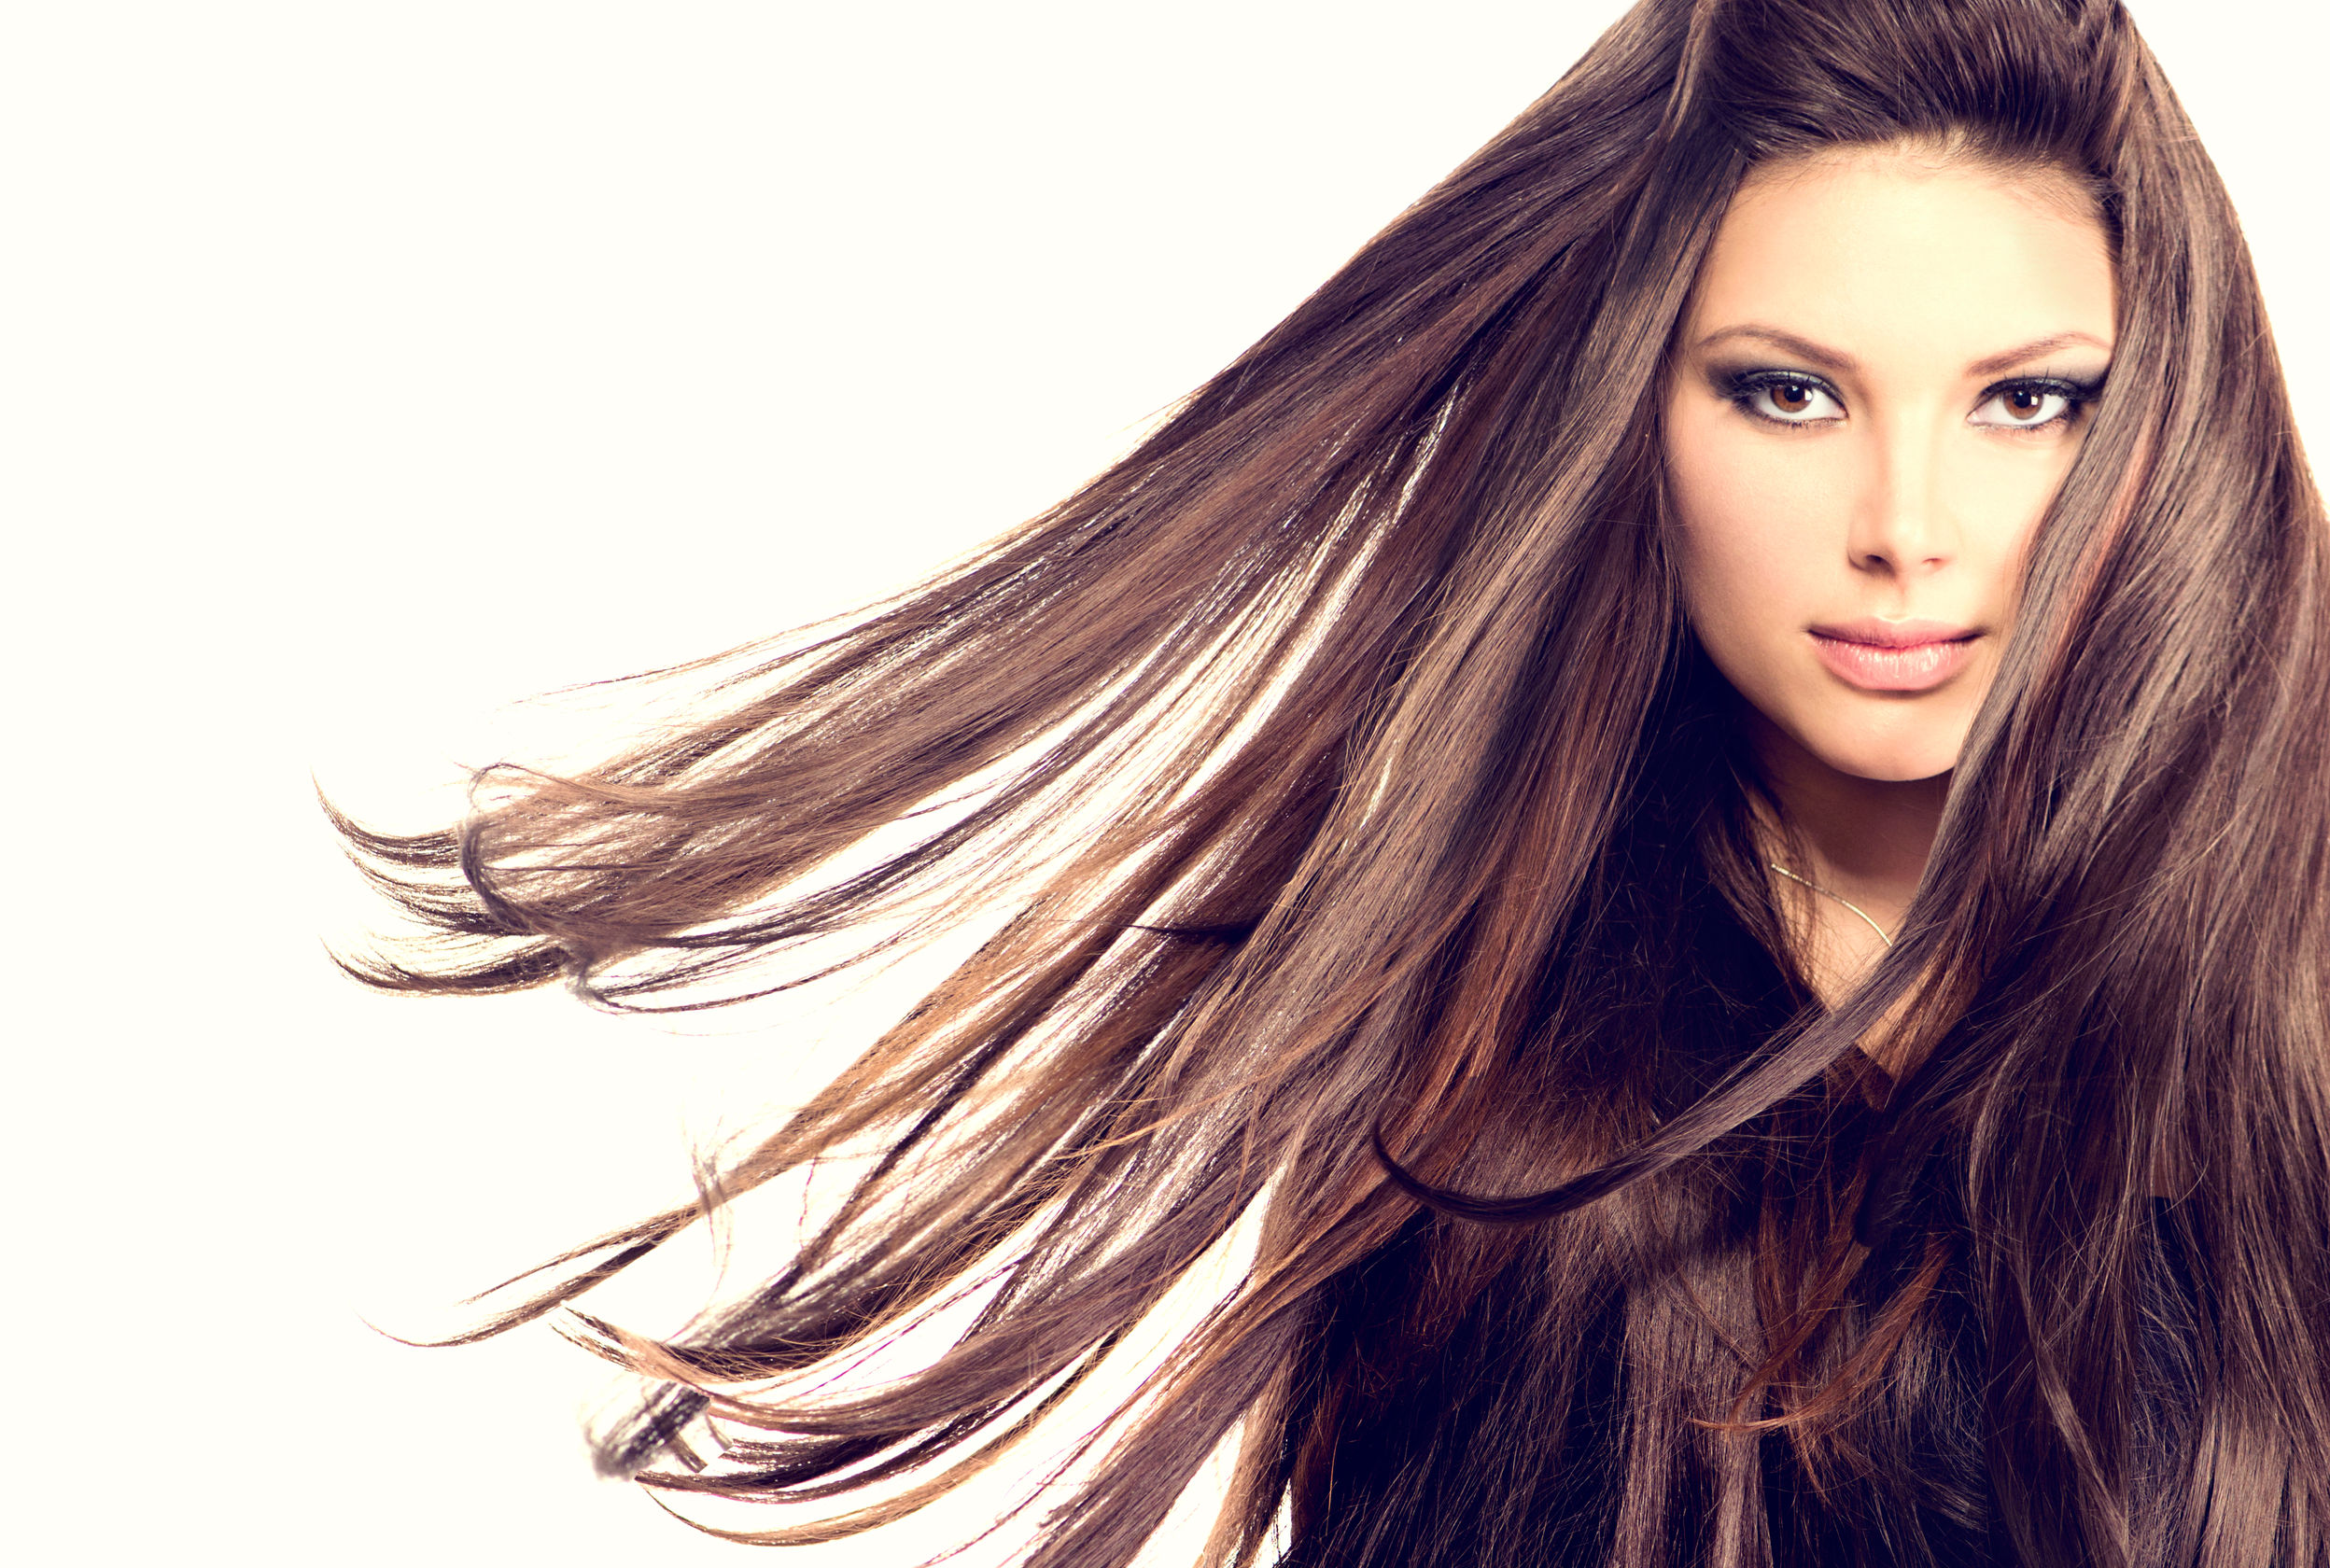 Remedies to Grow, Strengthen, and Thicken Hair